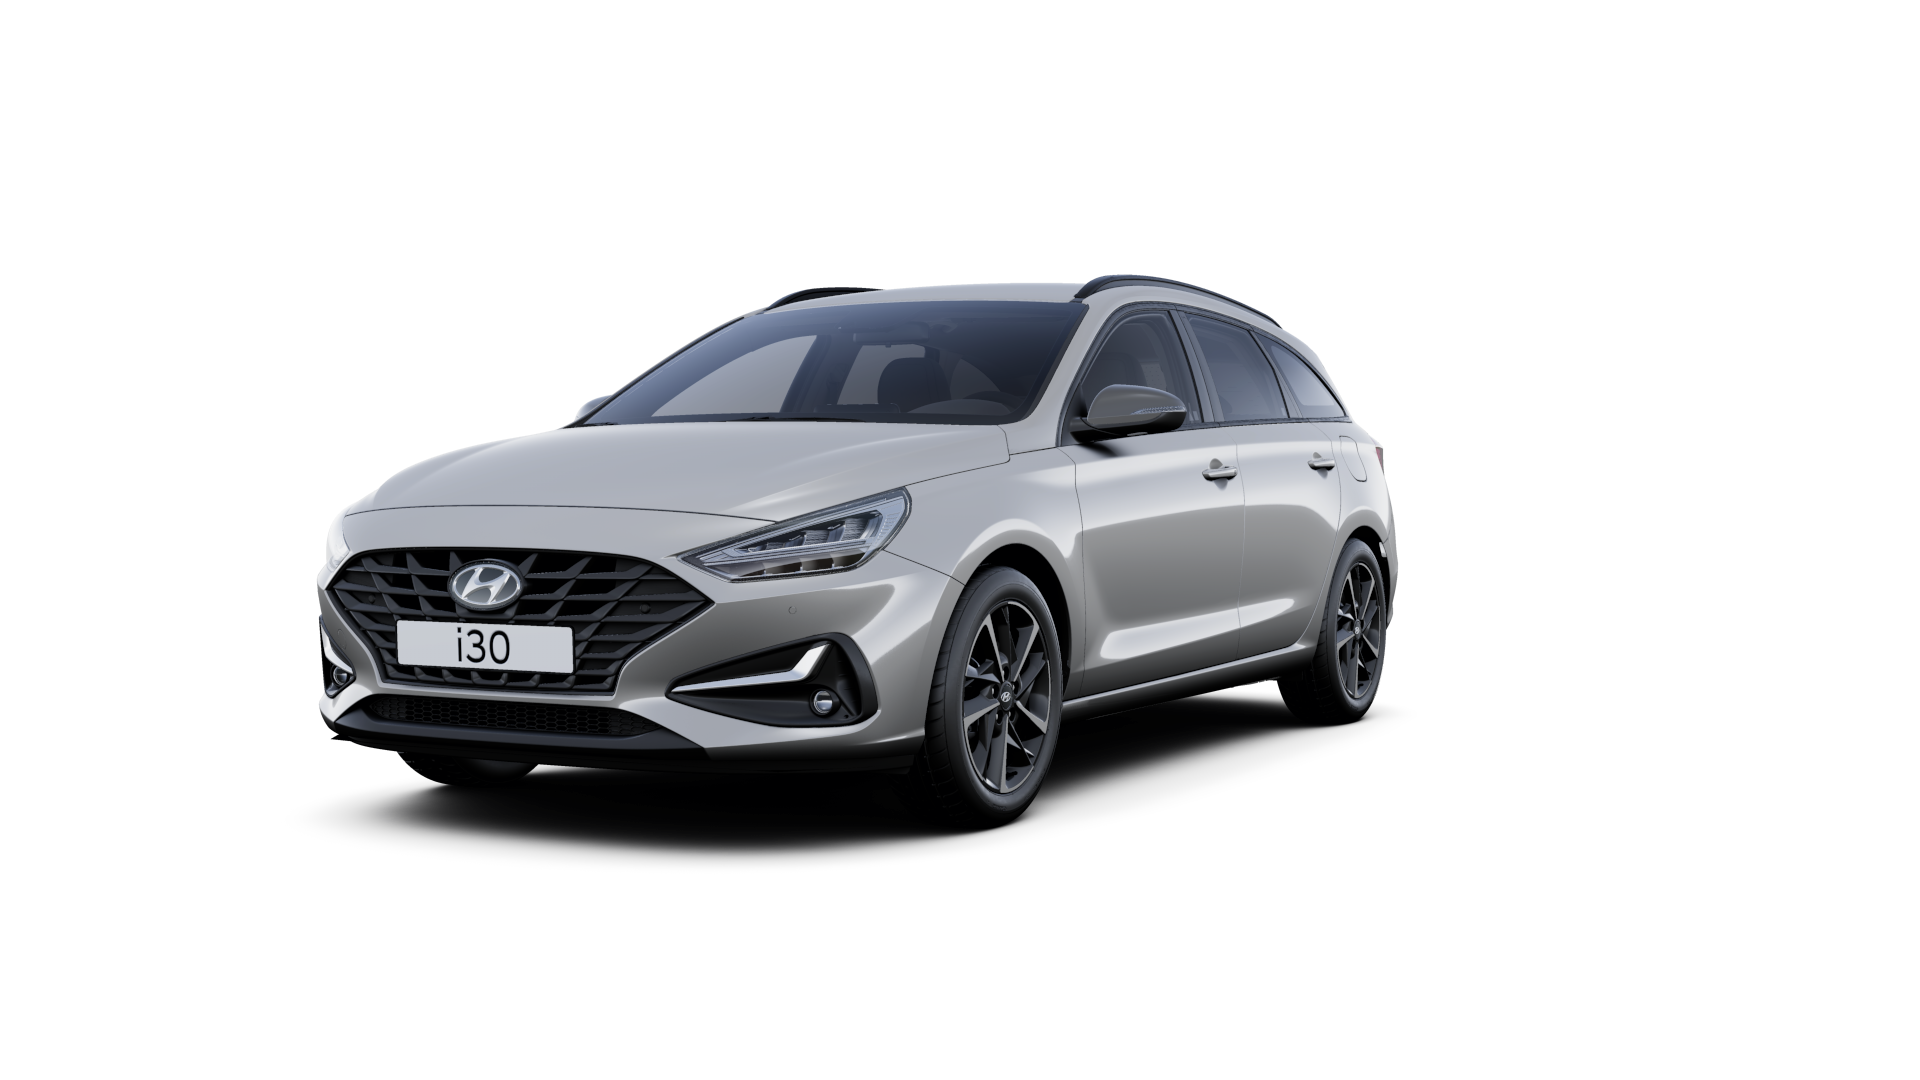 Front side view of the new Hyundai i30 Wagon in the colour Shimmering Silver.